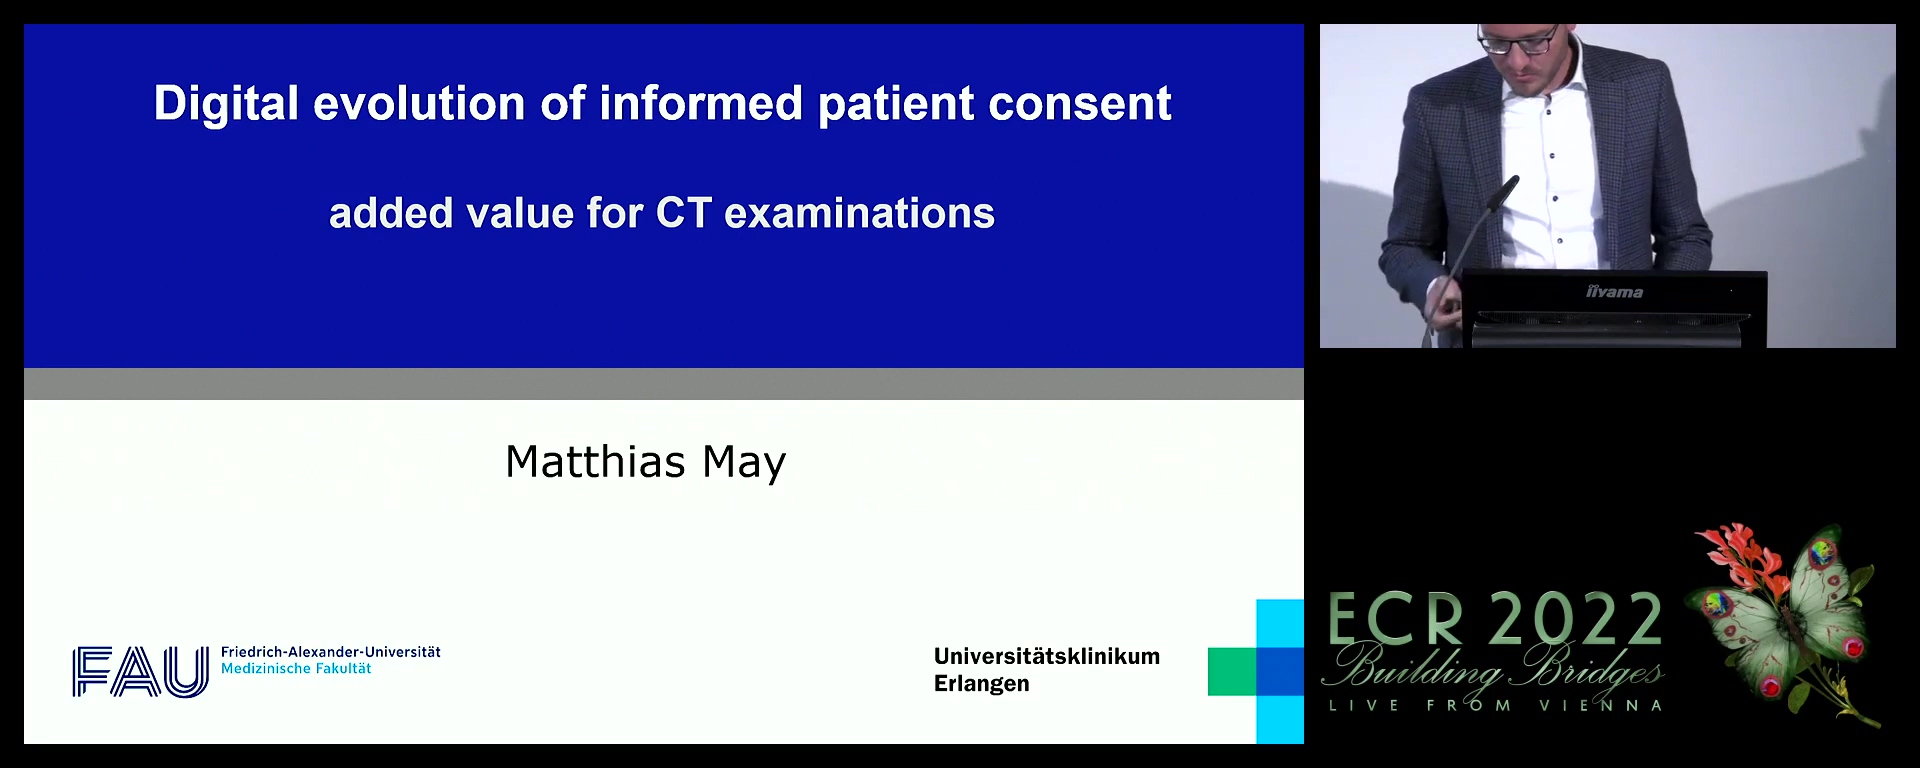 Digital evolution of informed patient consent: added value for CT examinations